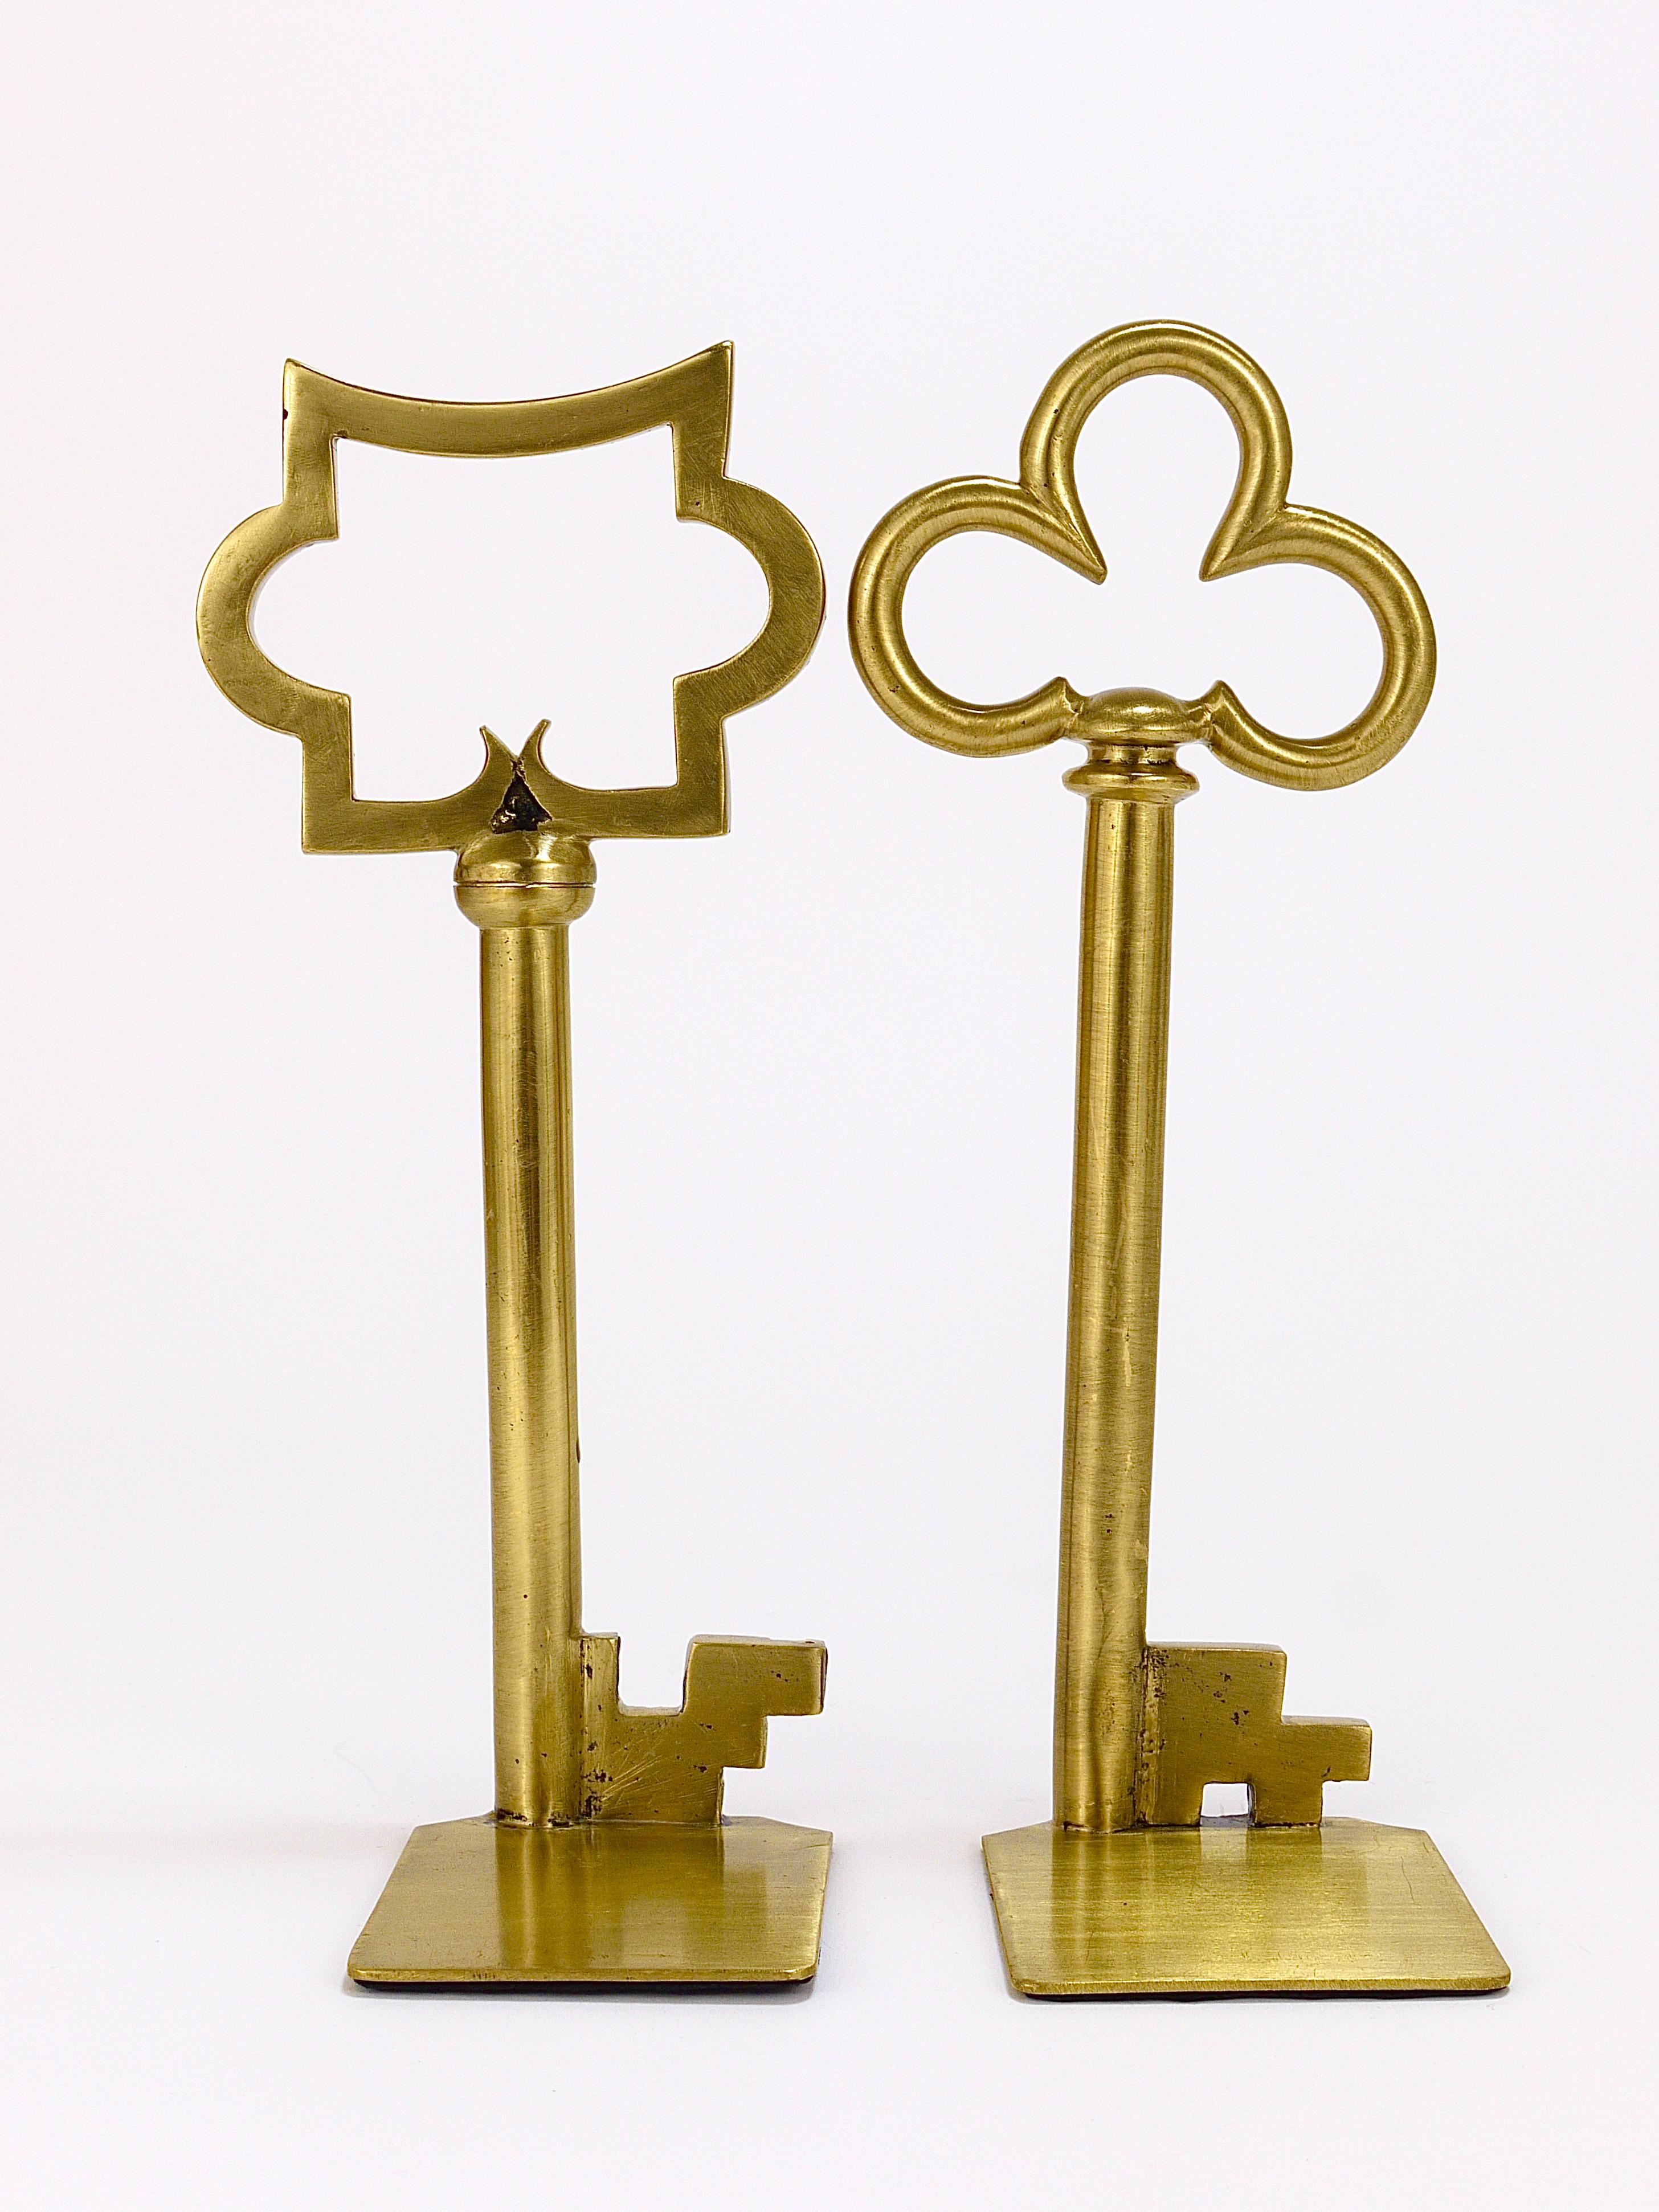 20th Century Sculptural Austrian Midcentury Brass Key Book Ends from the, 1950s For Sale